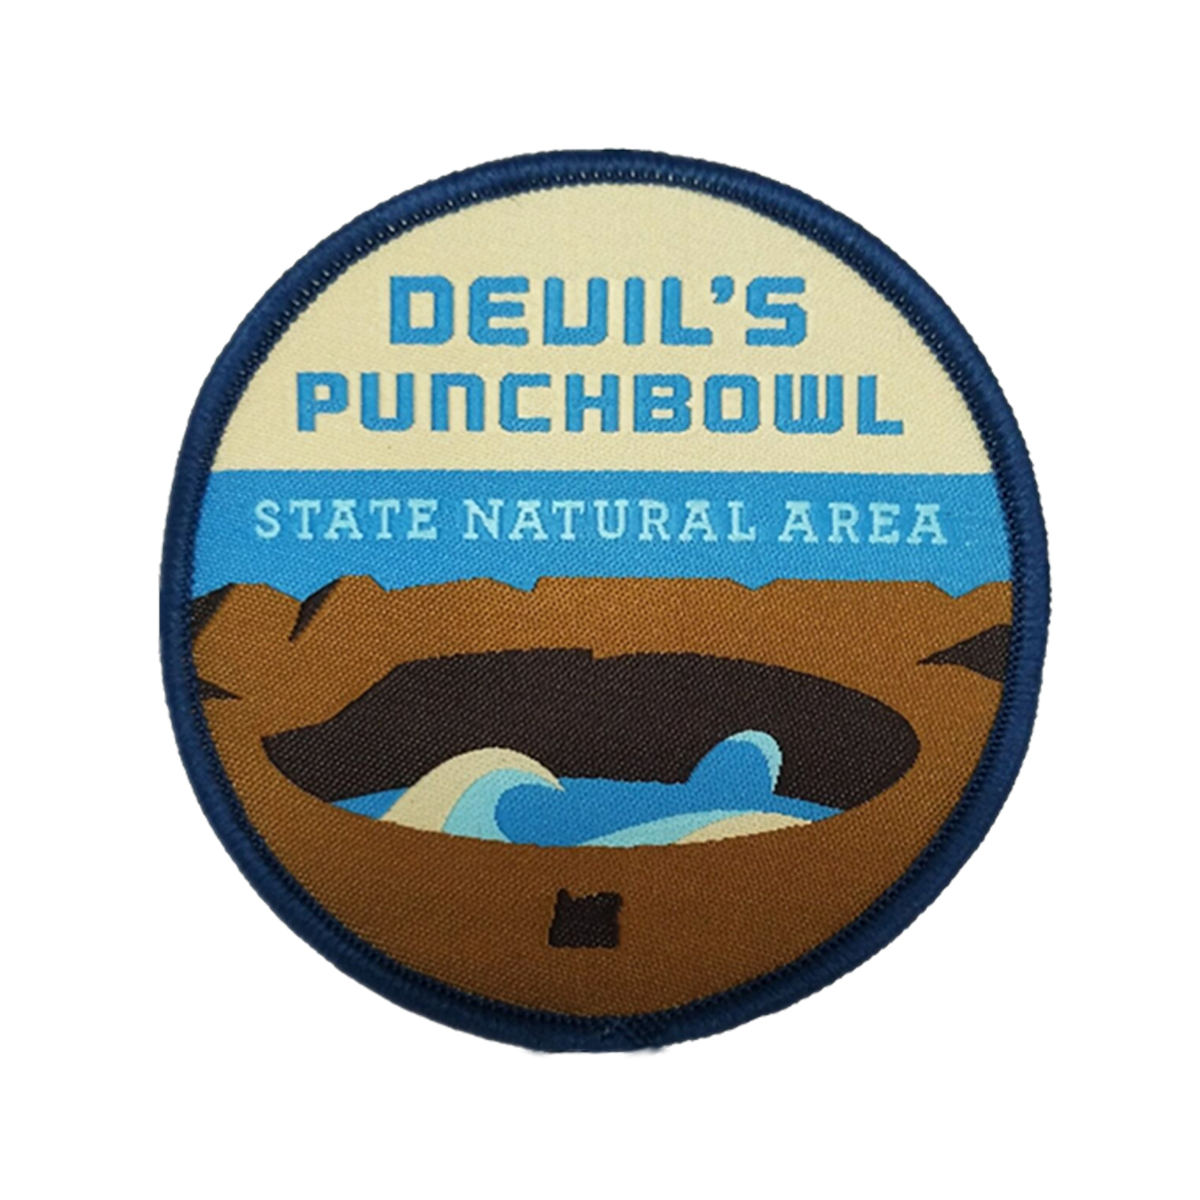 Devil's Punchbowl State Natural Area 3" Iron-on Patch